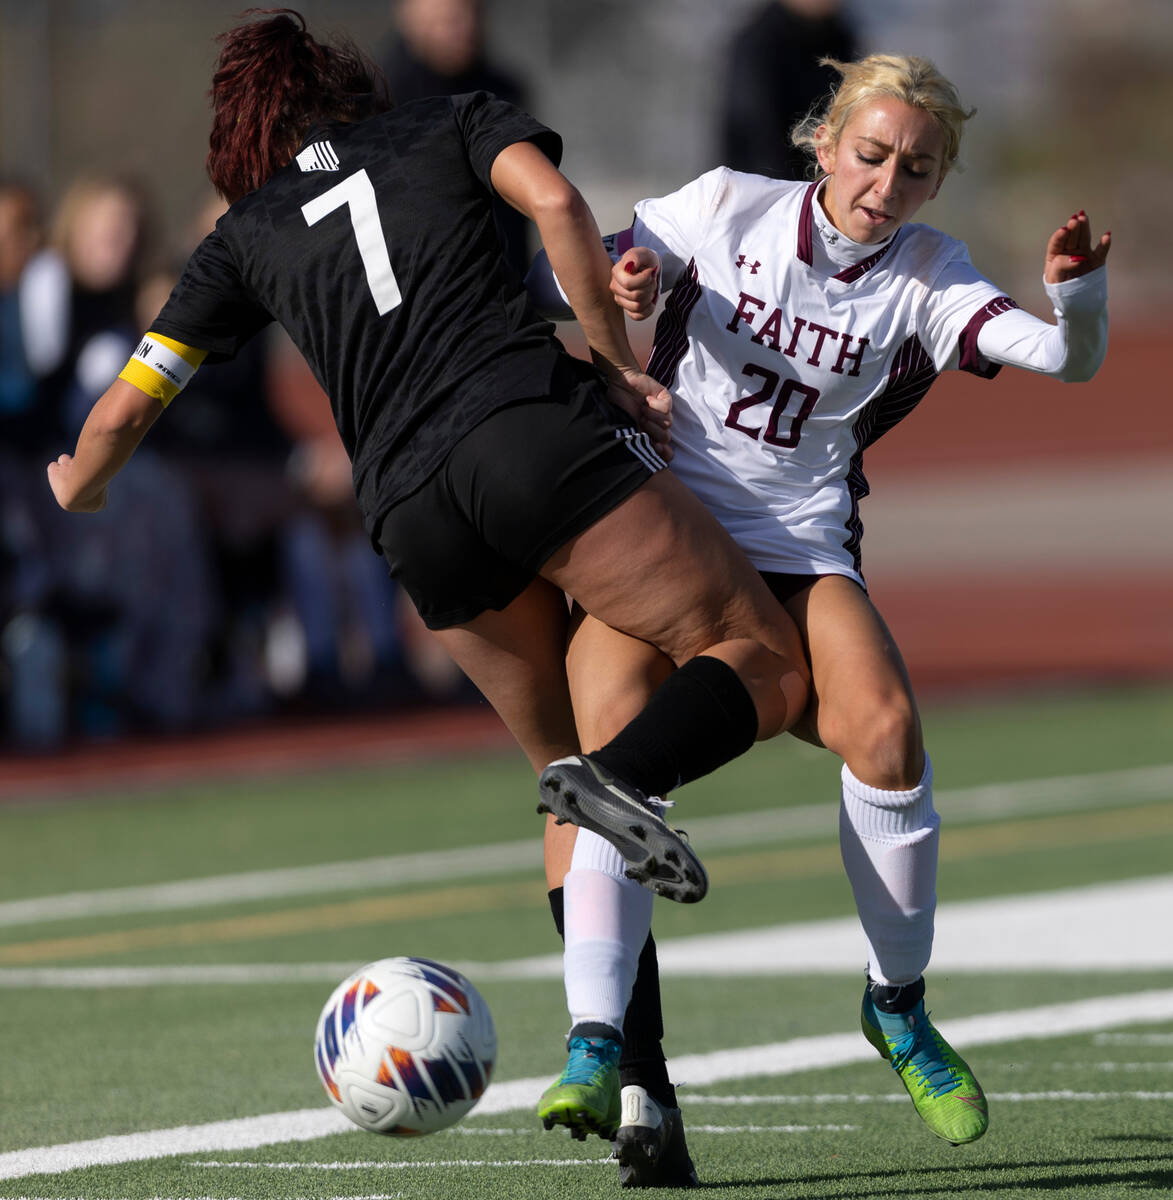 Faith Lutheran’s Ava Gardner (20) attempts to pass while colliding with Galena’s ...